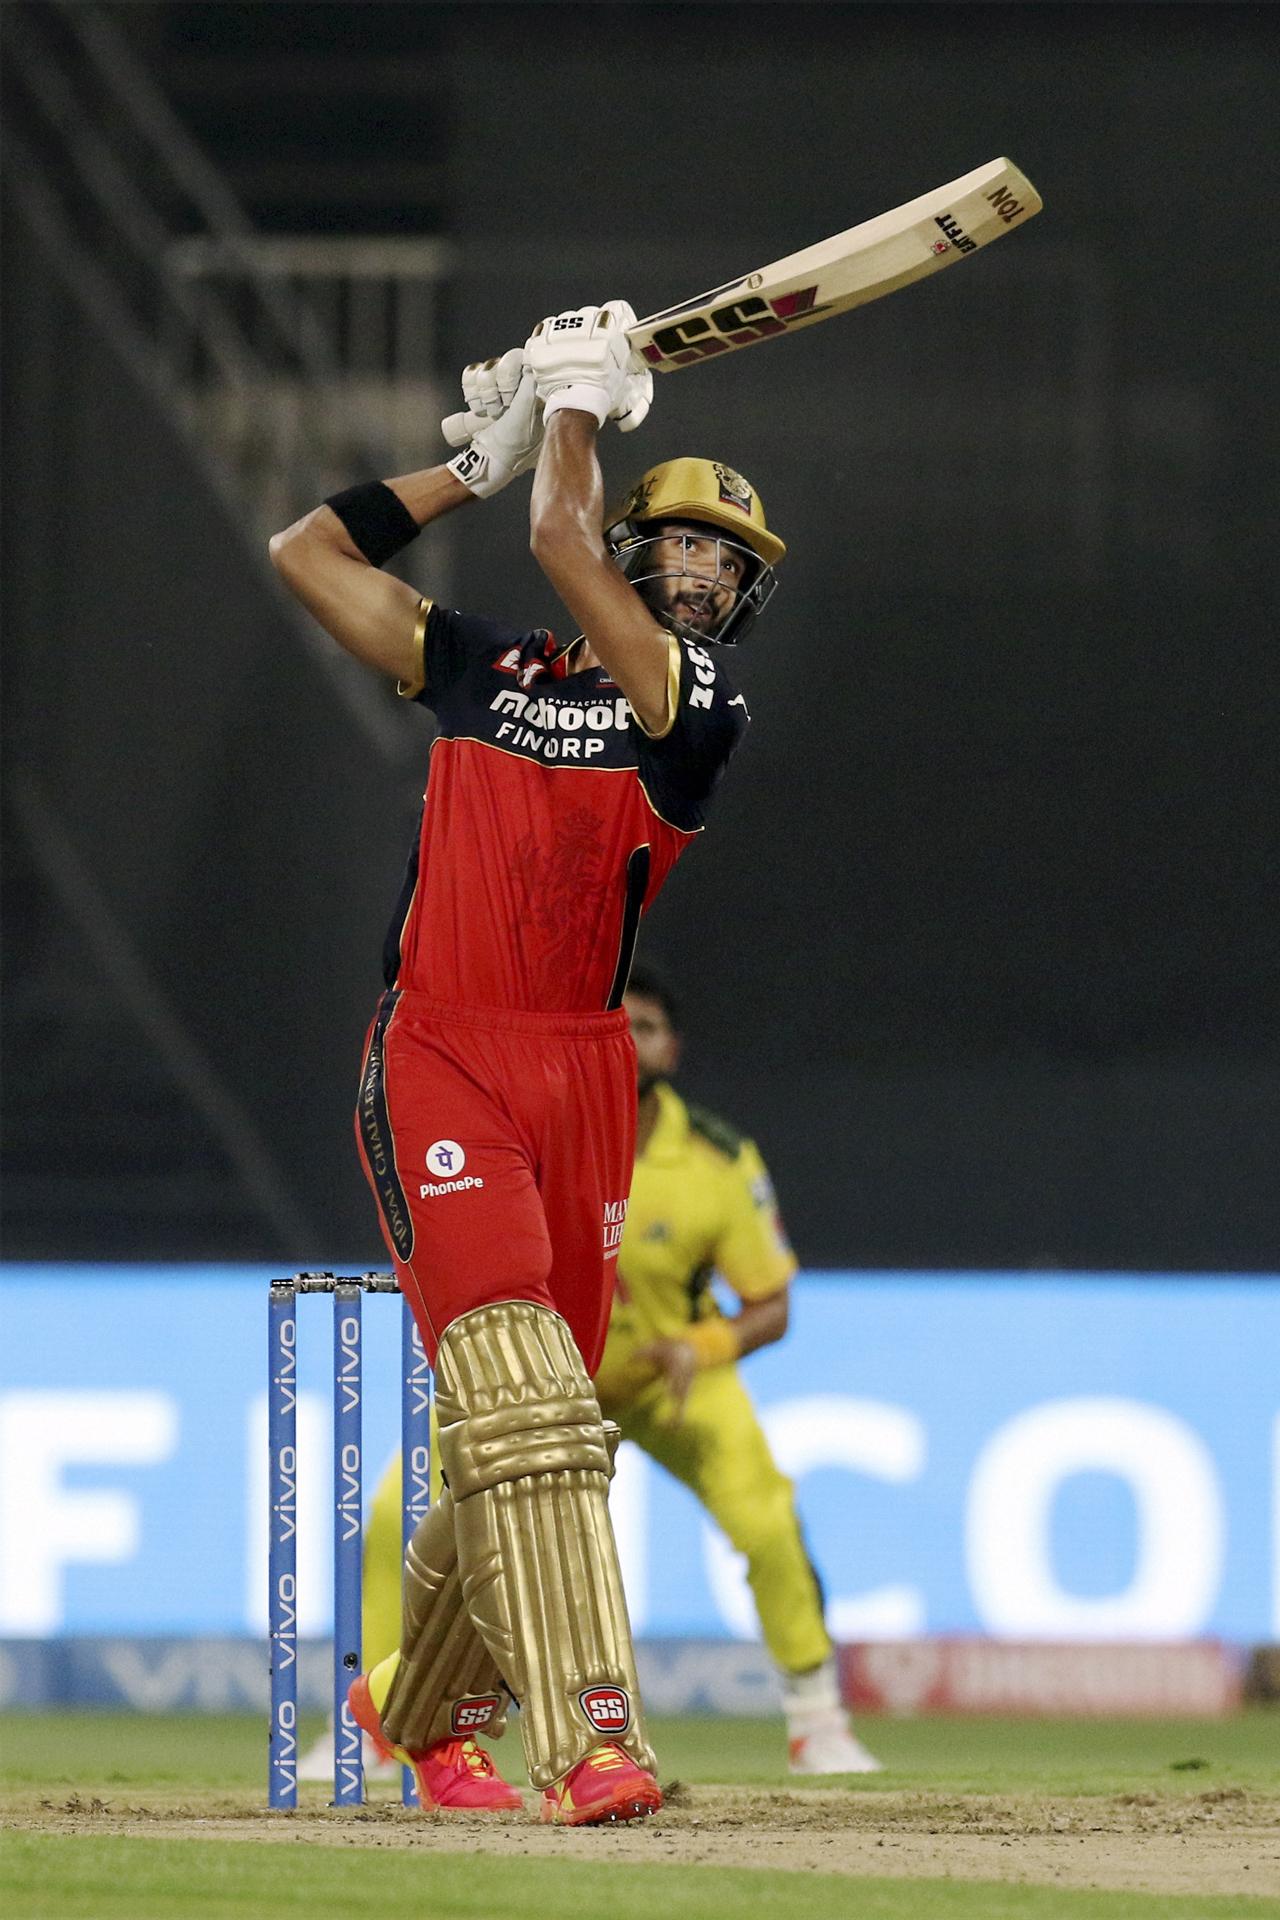 Devdutt Padikkal of Royal Challengers plays a shot during match 35 of the Vivo Indian Premier League between the Royal Challengers Bangalore and the Chennai Super Kings. He went on to score 70 off 50 balls. Pic/ PTI